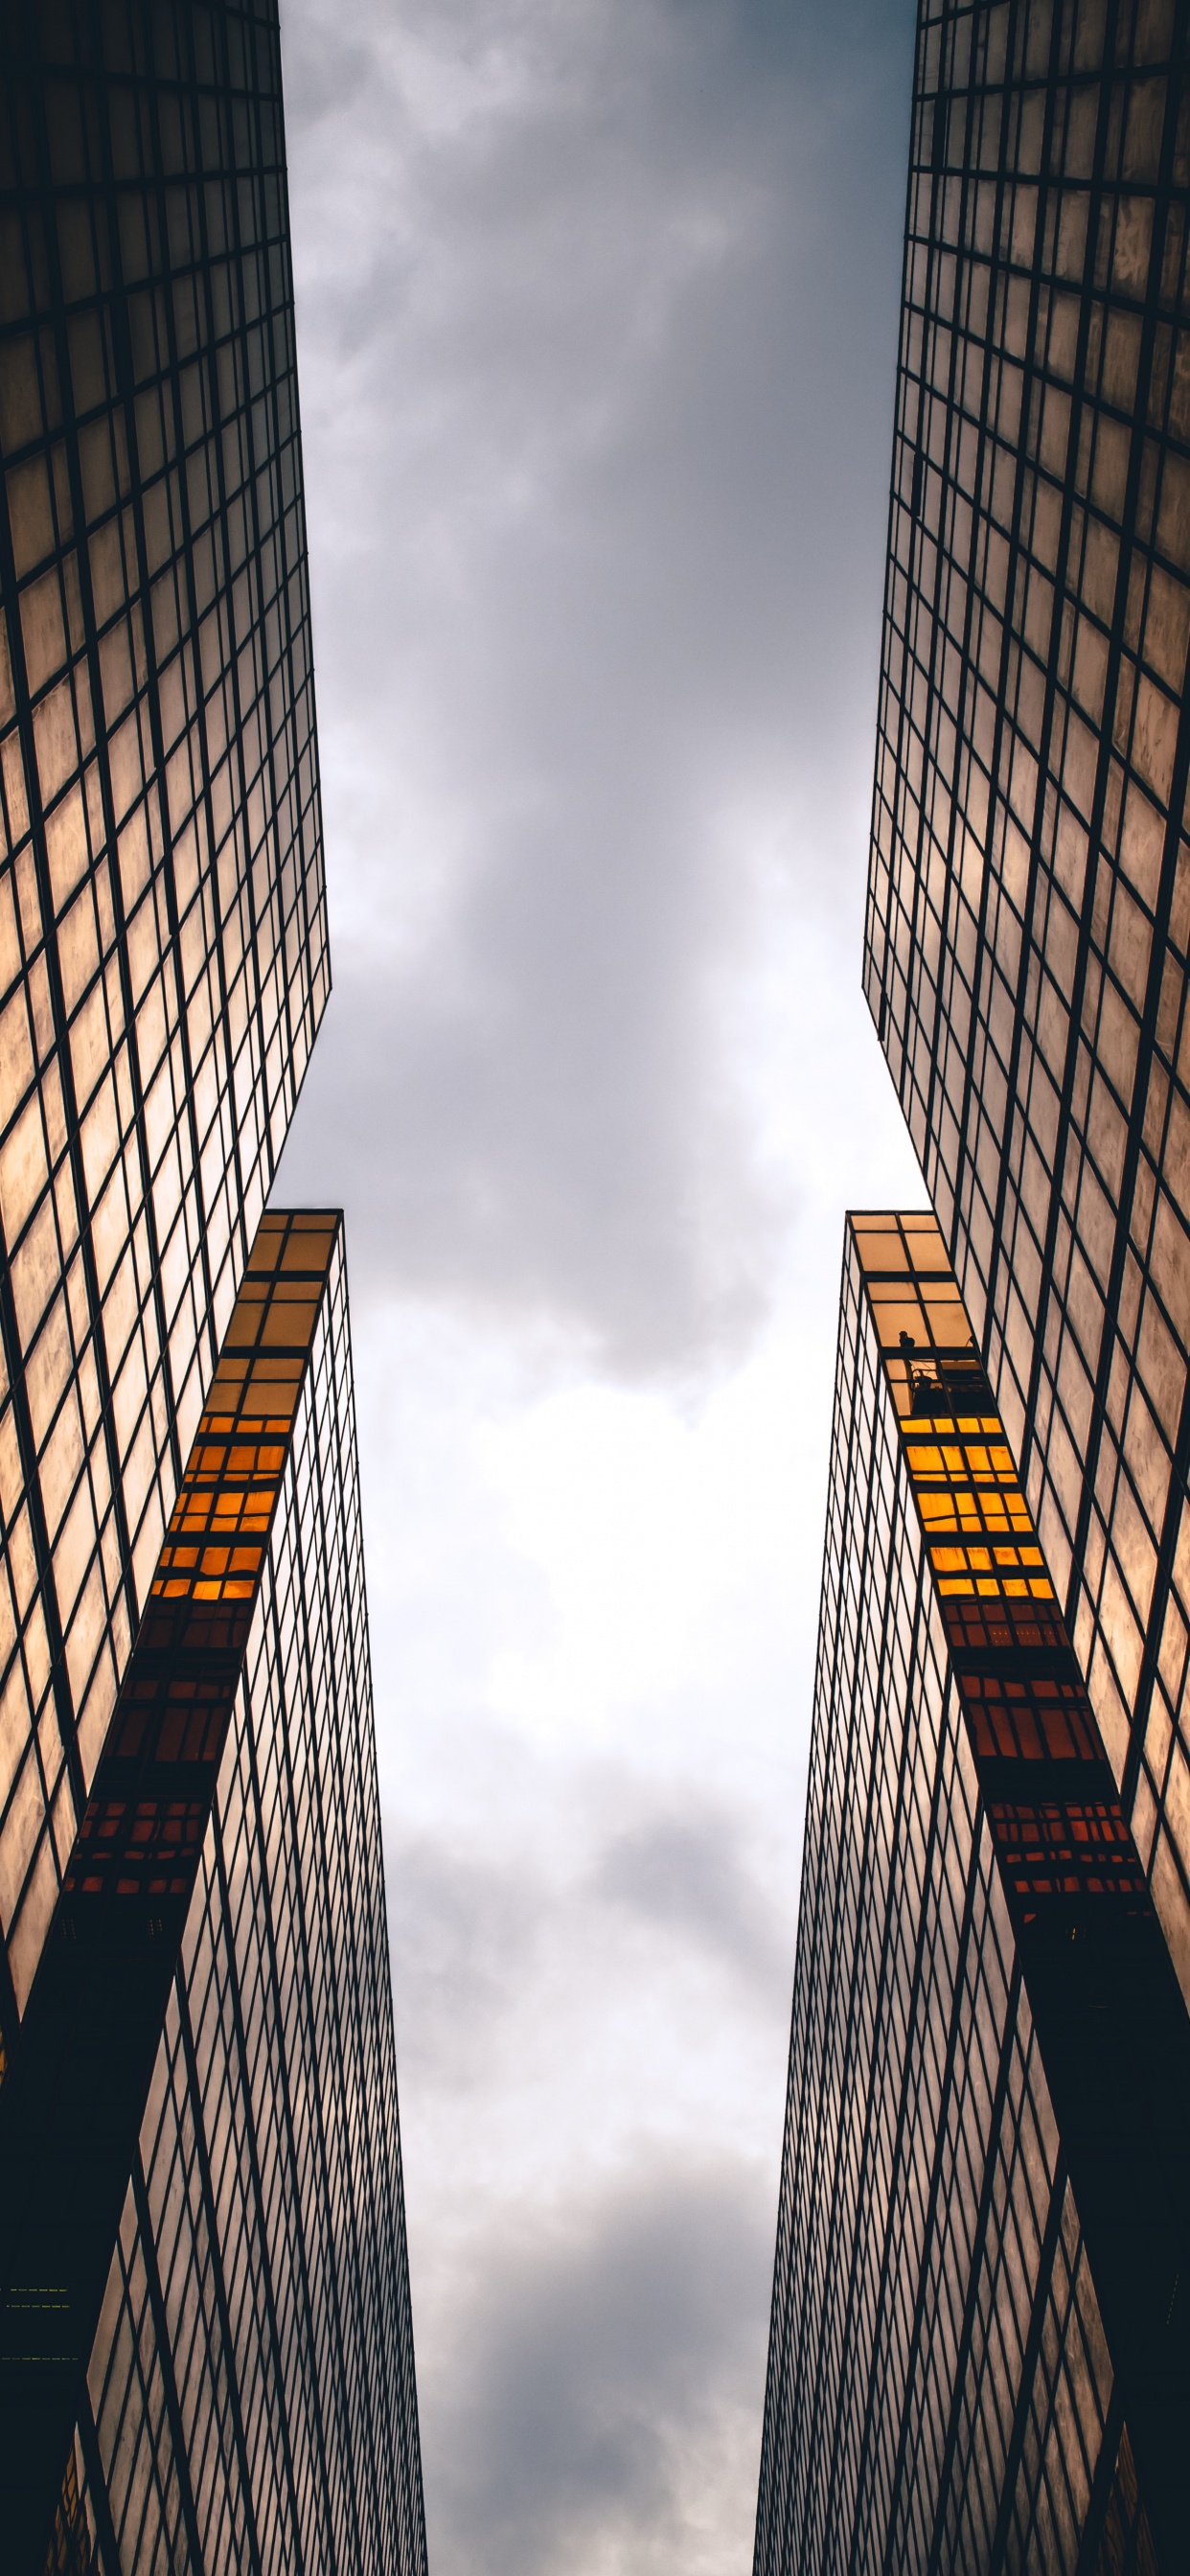 Low Angle Photography of High Rise Buildings. Wallpaper in 1242x2688 Resolution